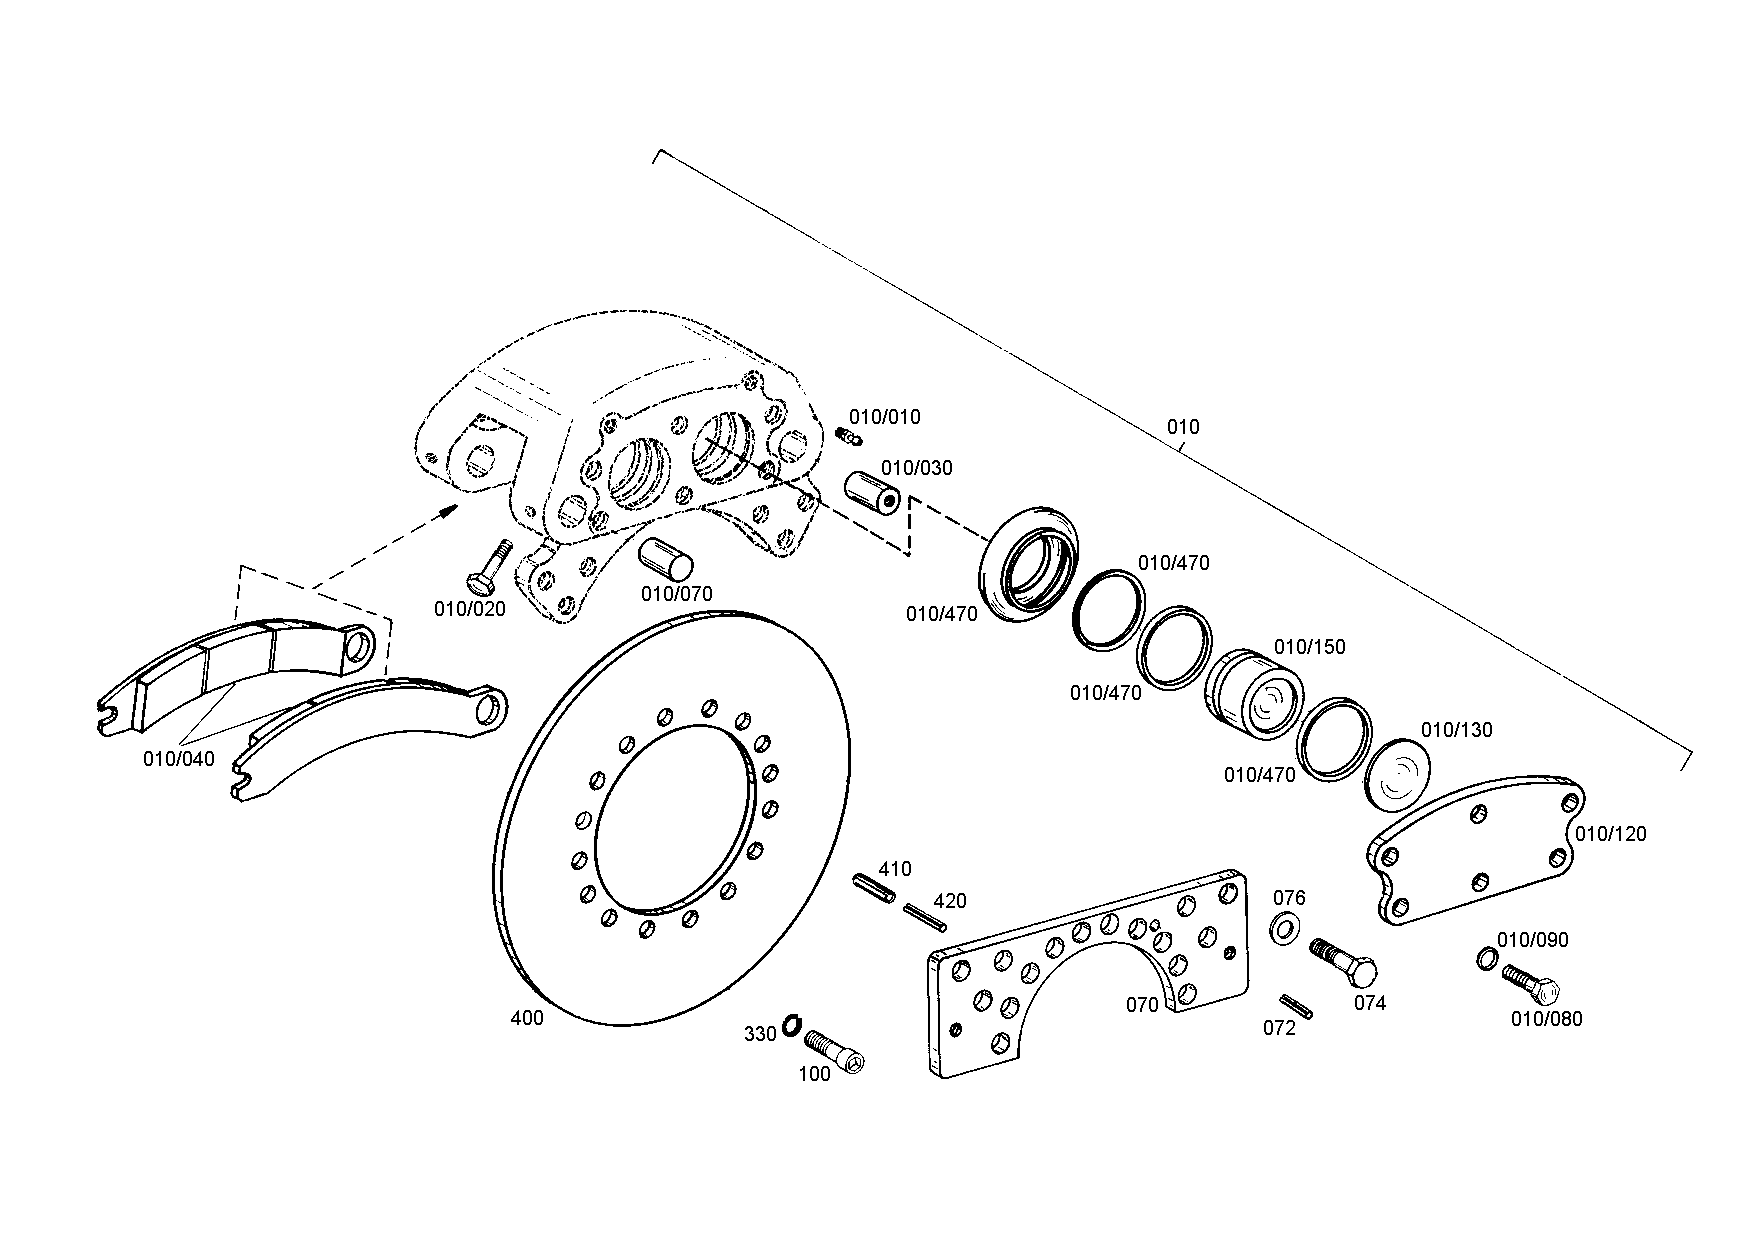 drawing for TIMONEY TECHNOLOGIE LTD. 5904657949 - WASHER (figure 5)